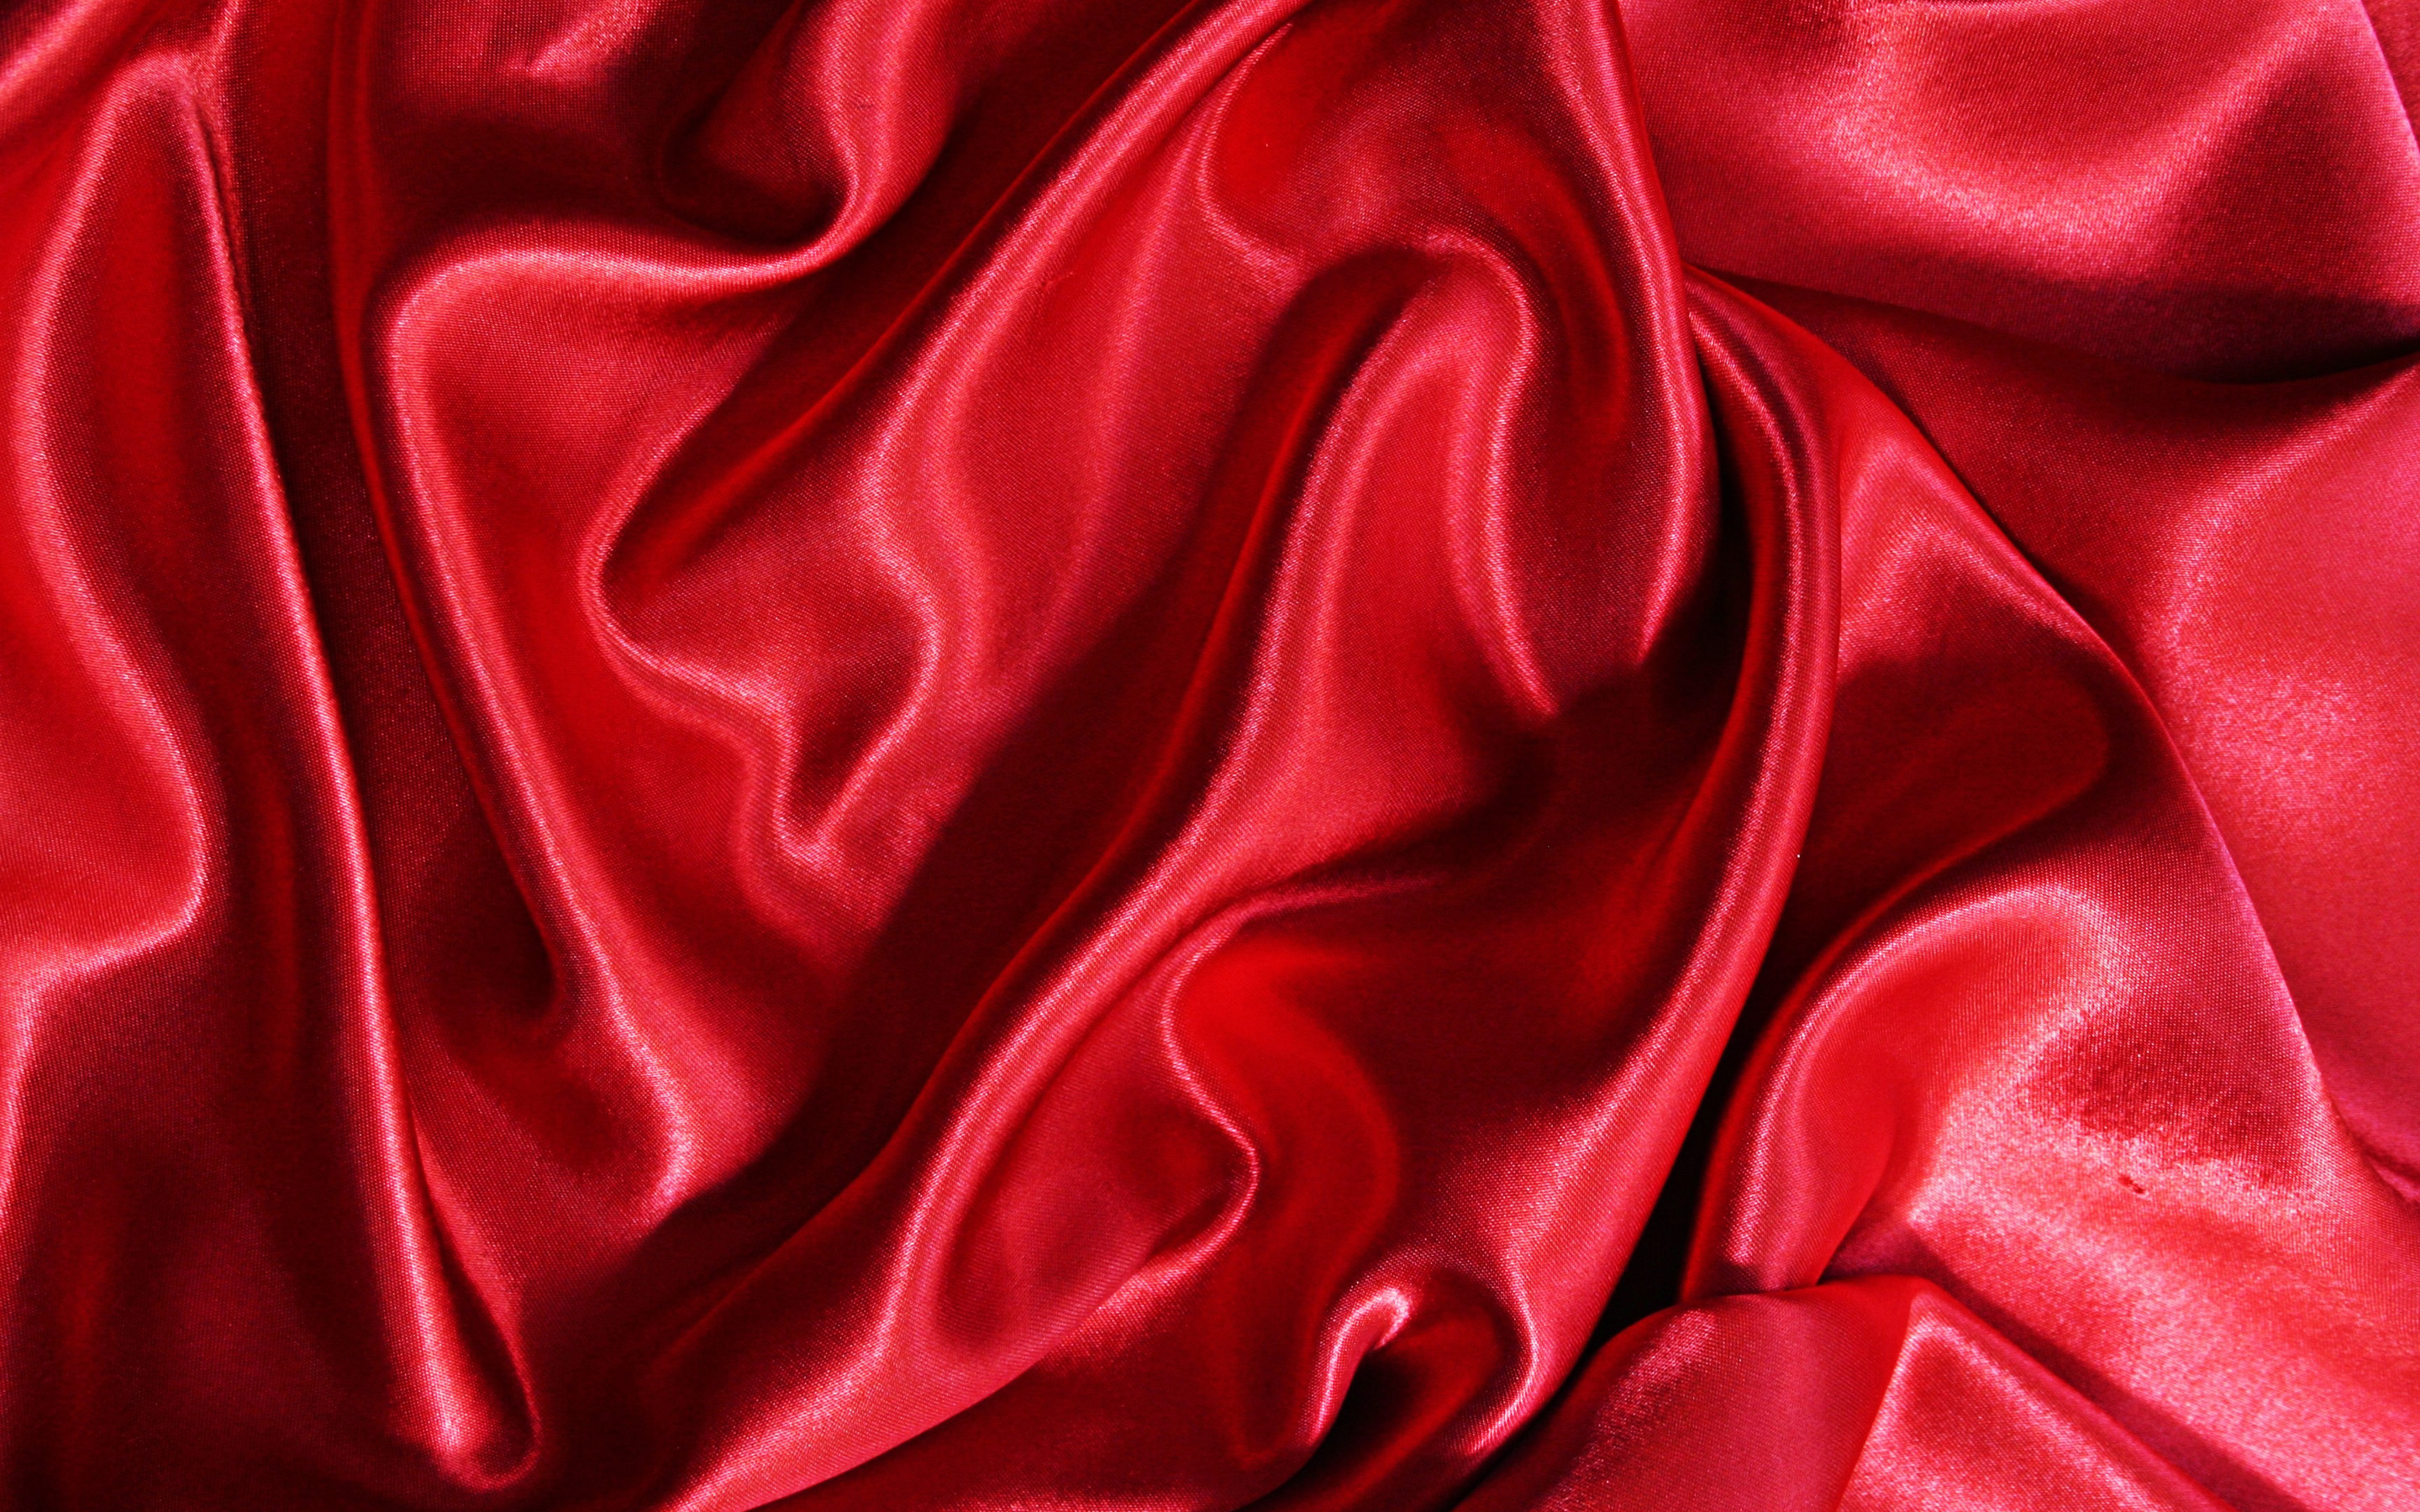 Download wallpaper red silk, blue fabric texture, silk, red background, satin, fabric textures, red satin, silk textures for desktop with resolution 2880x1800. High Quality HD picture wallpaper